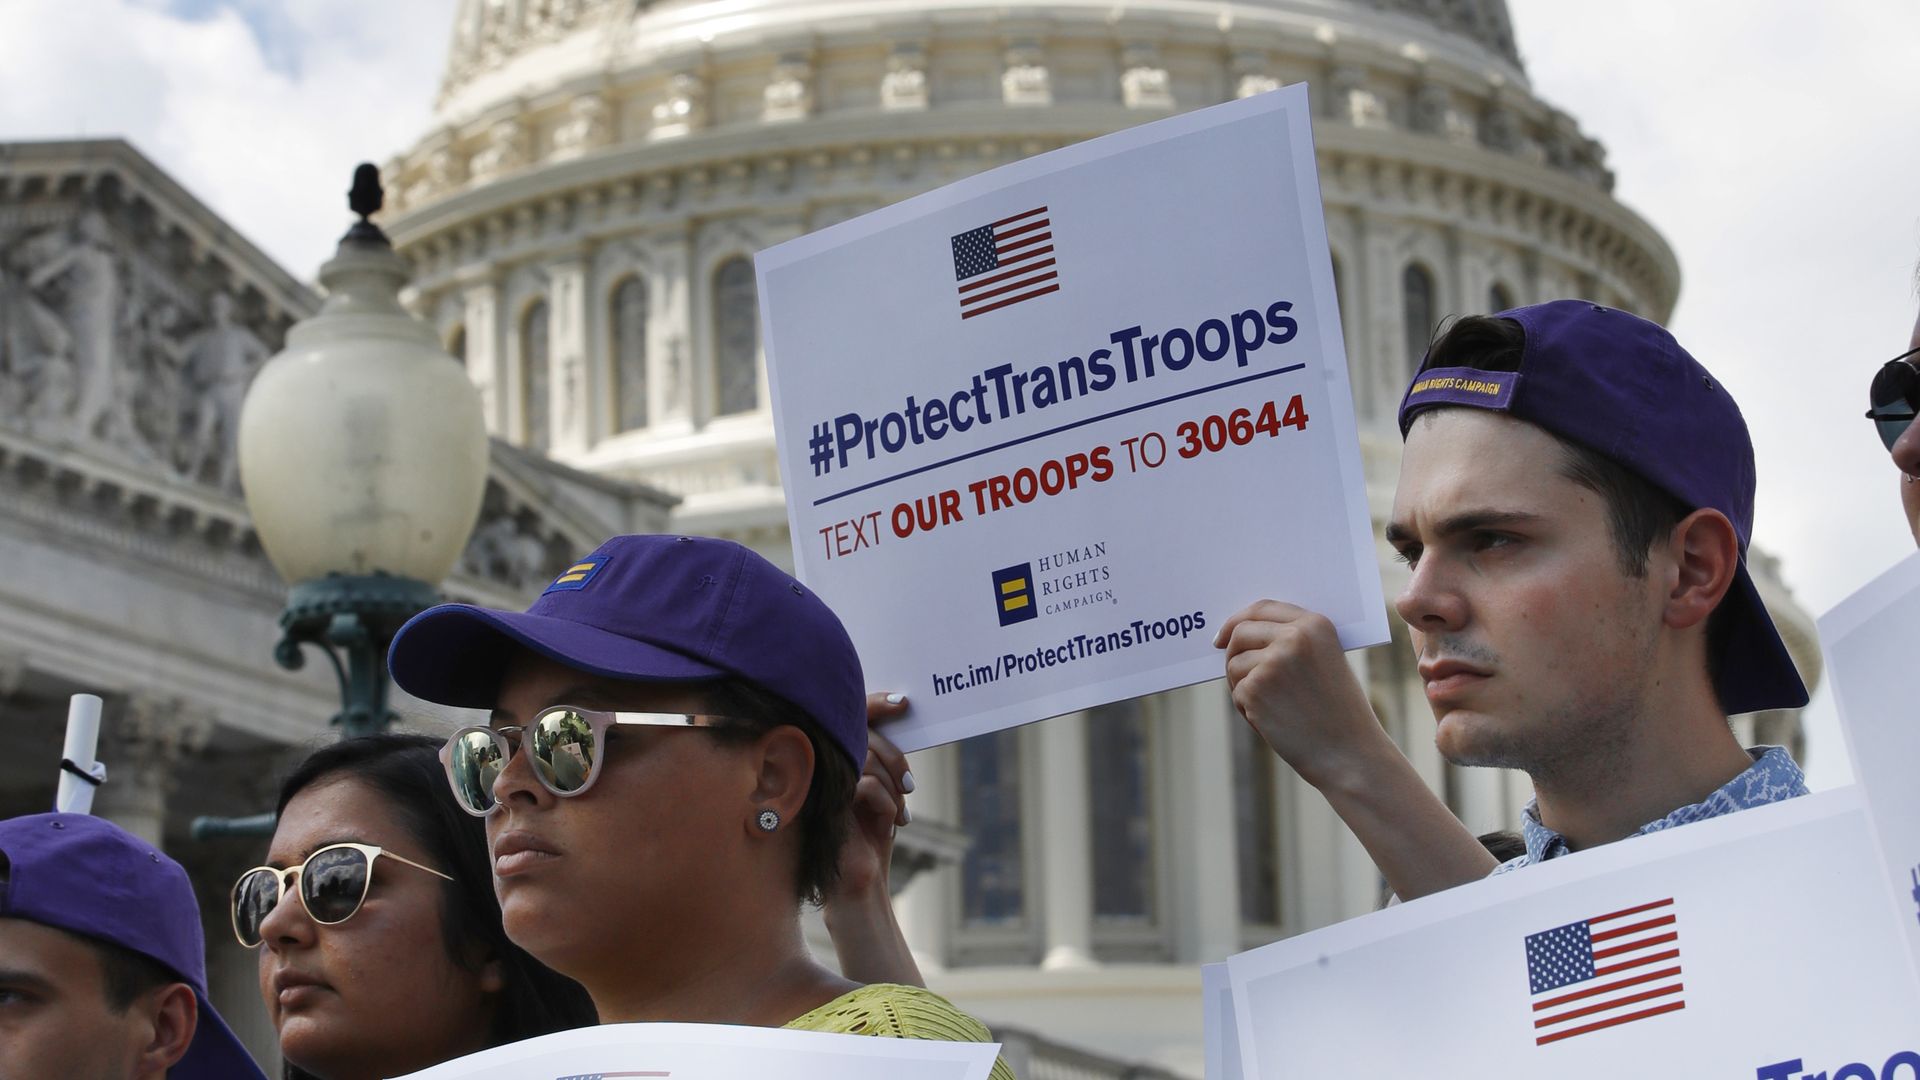 People protest Trump's transgender military ban at the Capitol